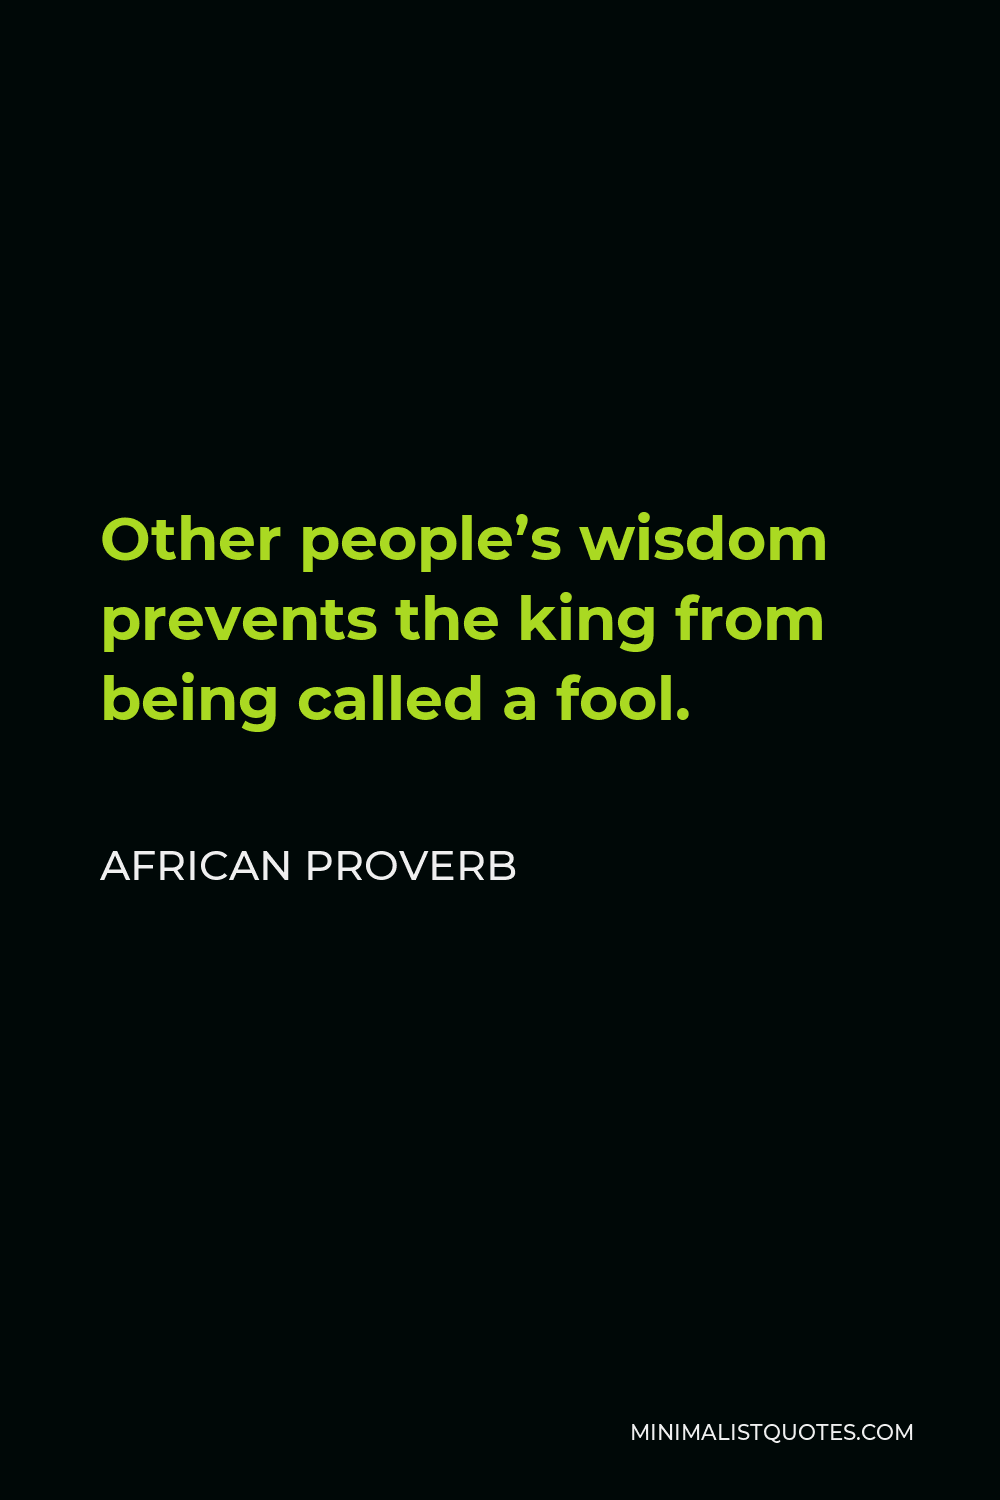 African Proverb Quote - Other people’s wisdom prevents the king from being called a fool.